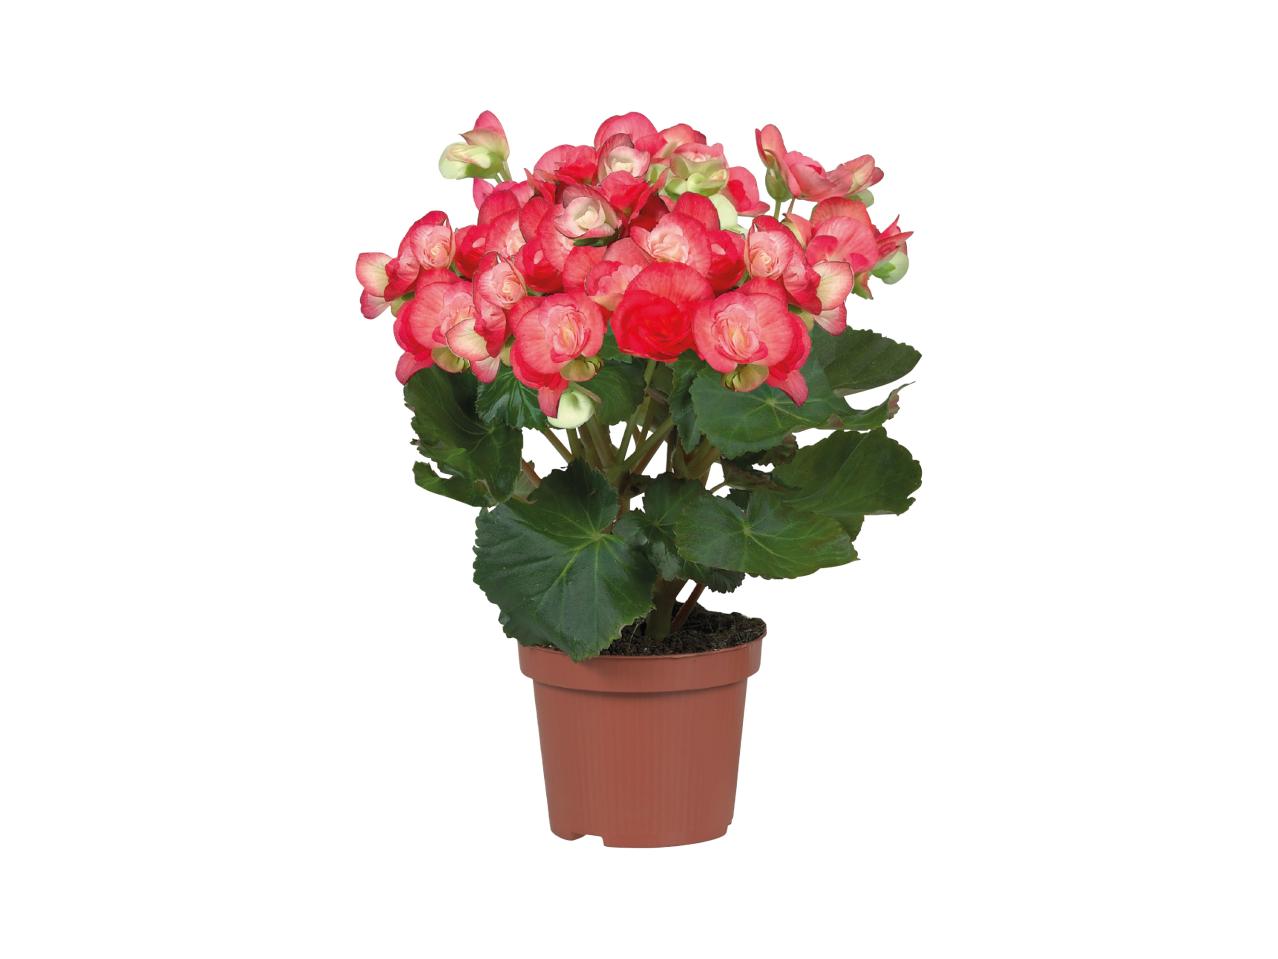 Begonia - Available from 2nd July1